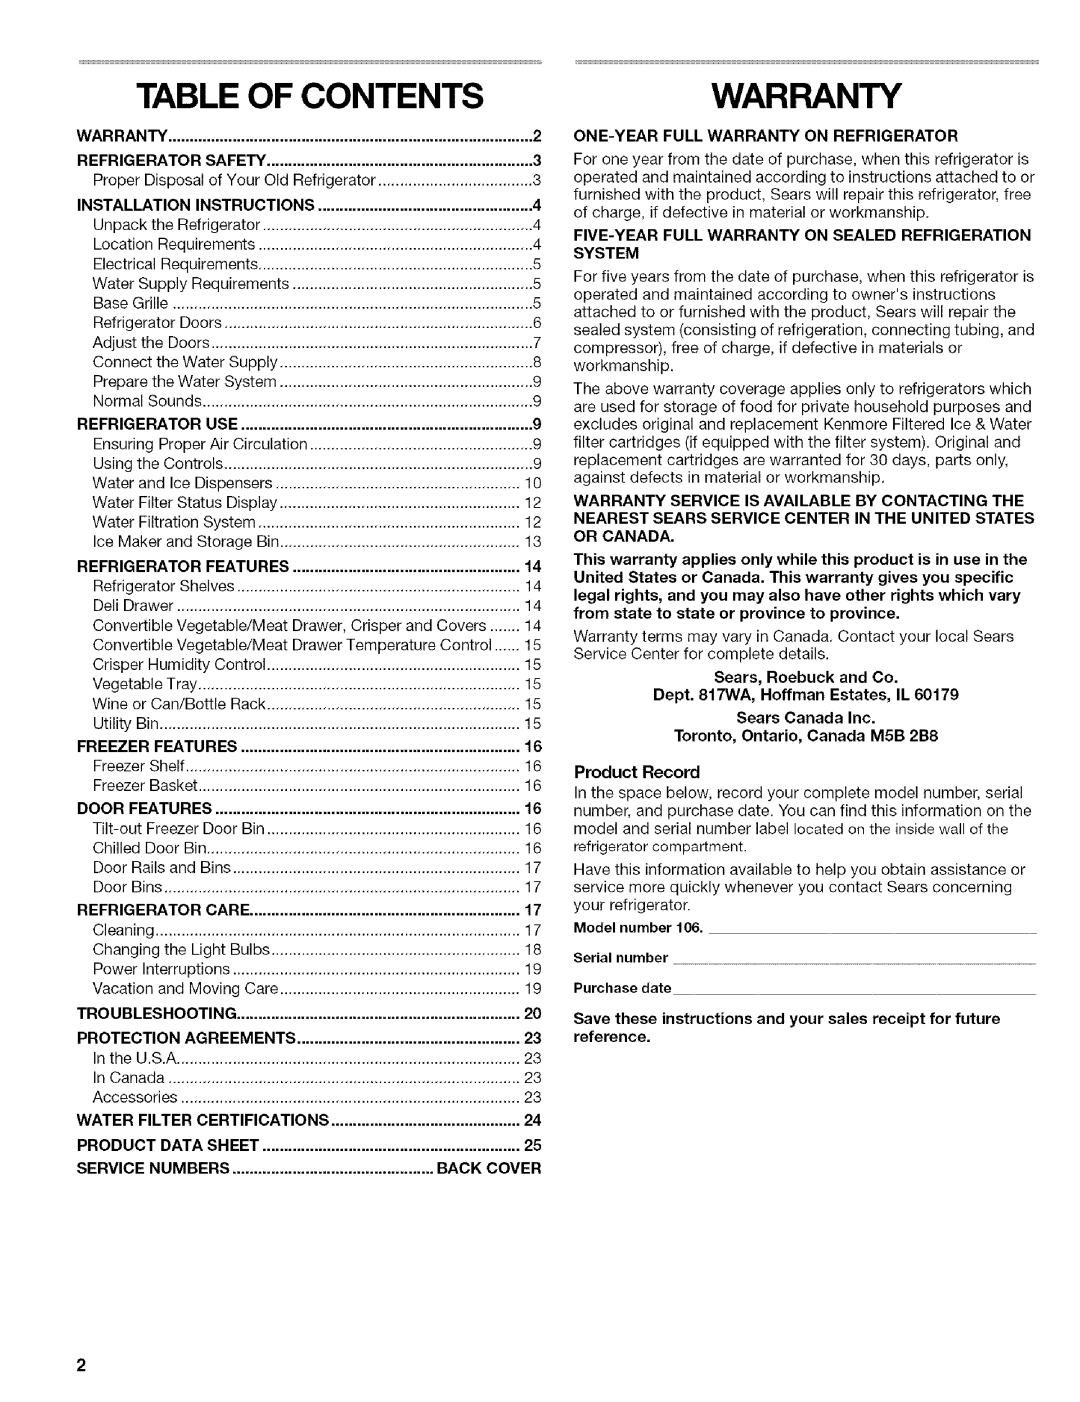 Kenmore 2305761A Table Of Contents, Warranty, Refrigerator, Features, Troubleshooting, Protection, Agreements, Product 